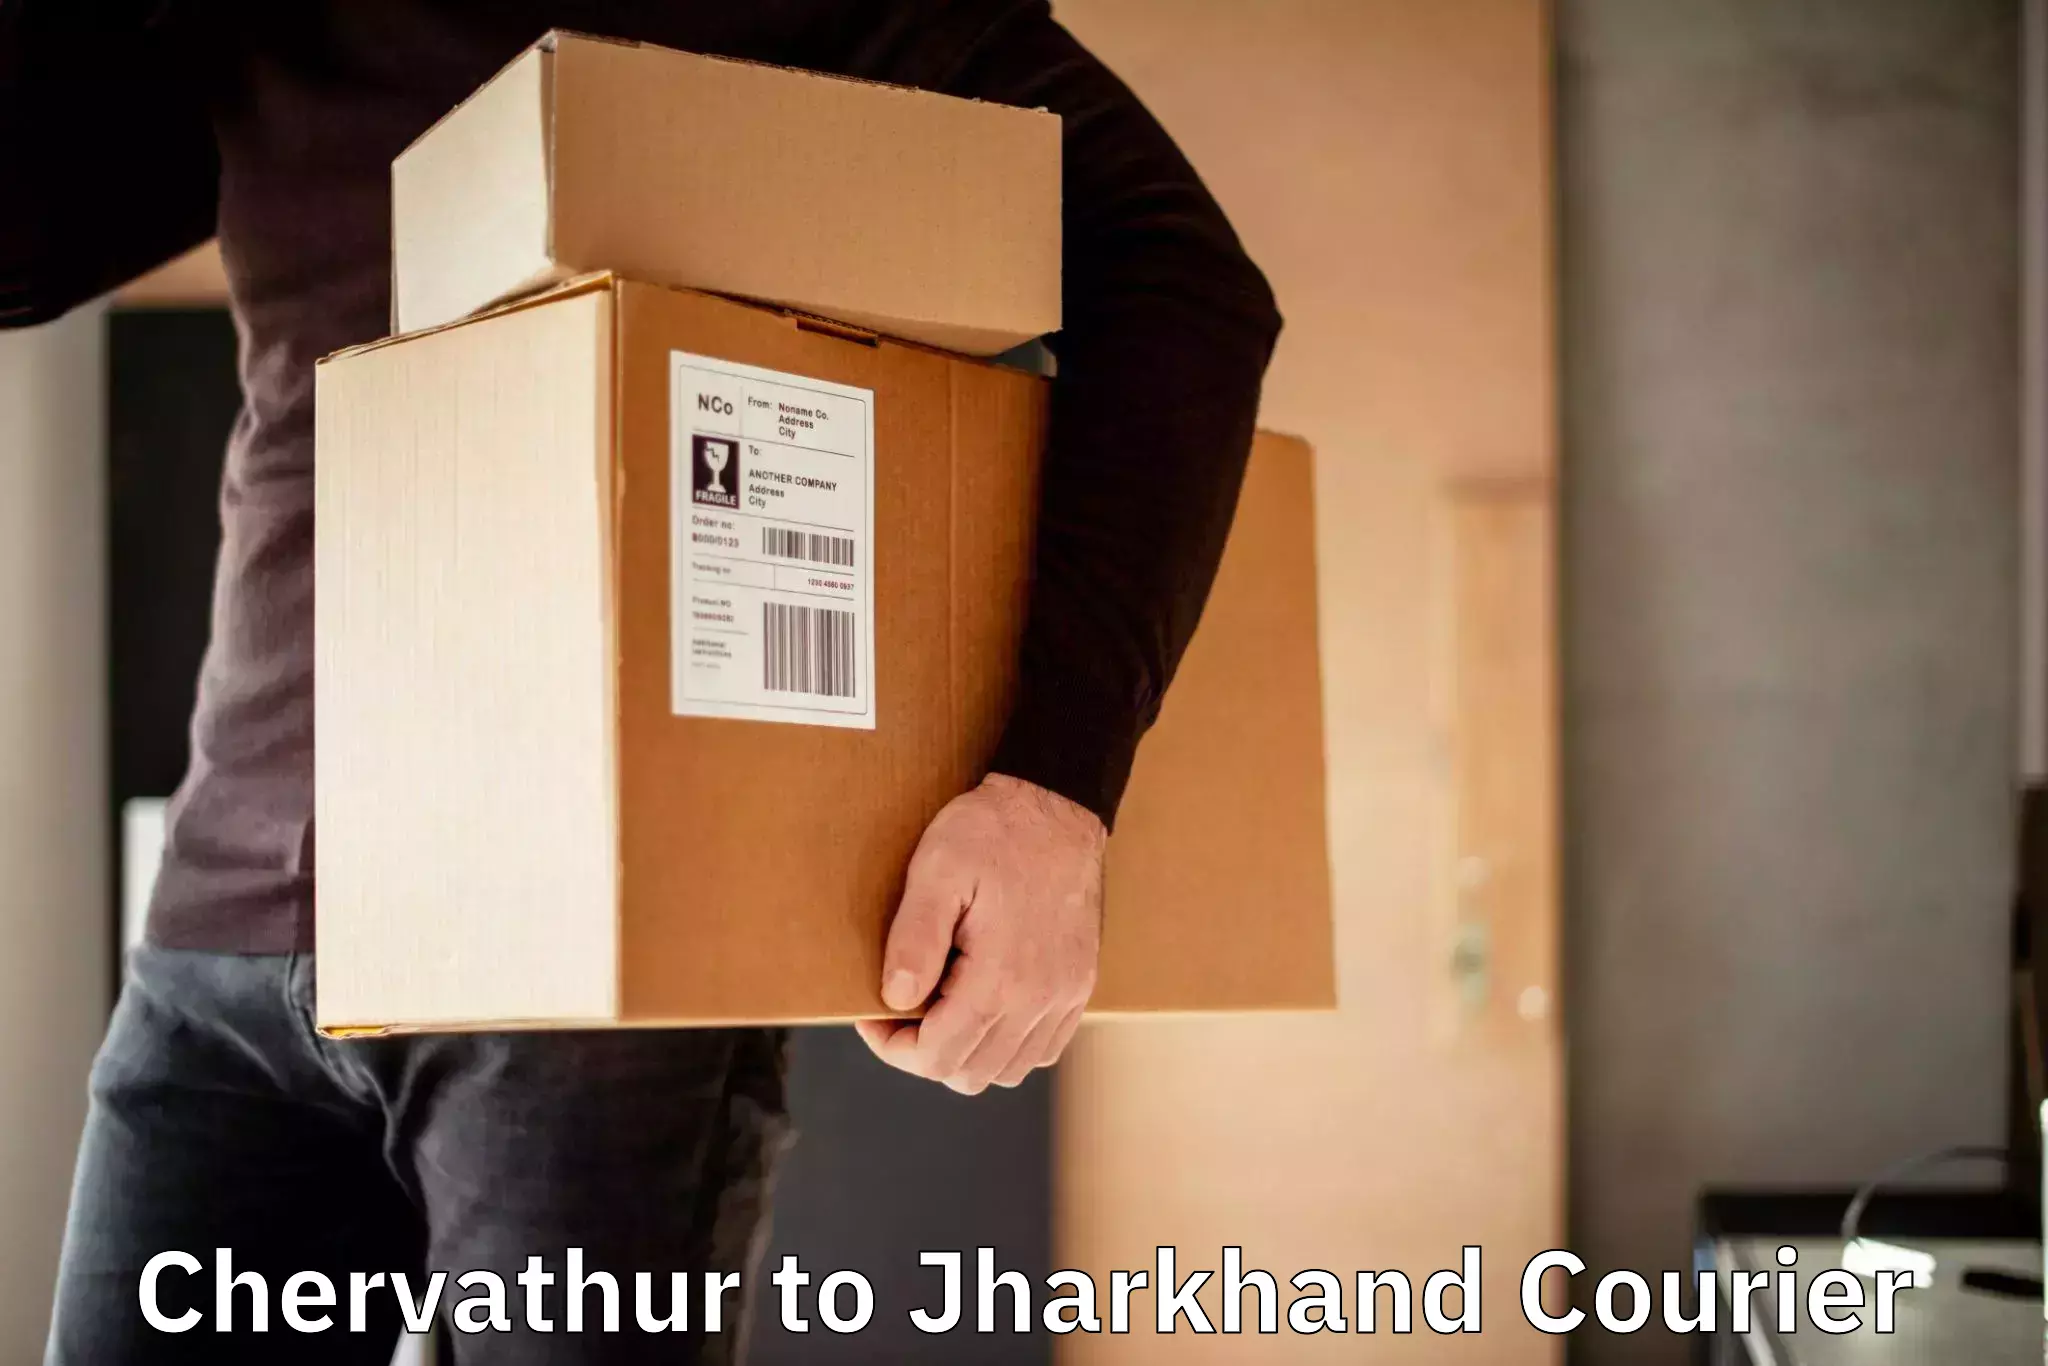 Specialized shipment handling Chervathur to Jharkhand